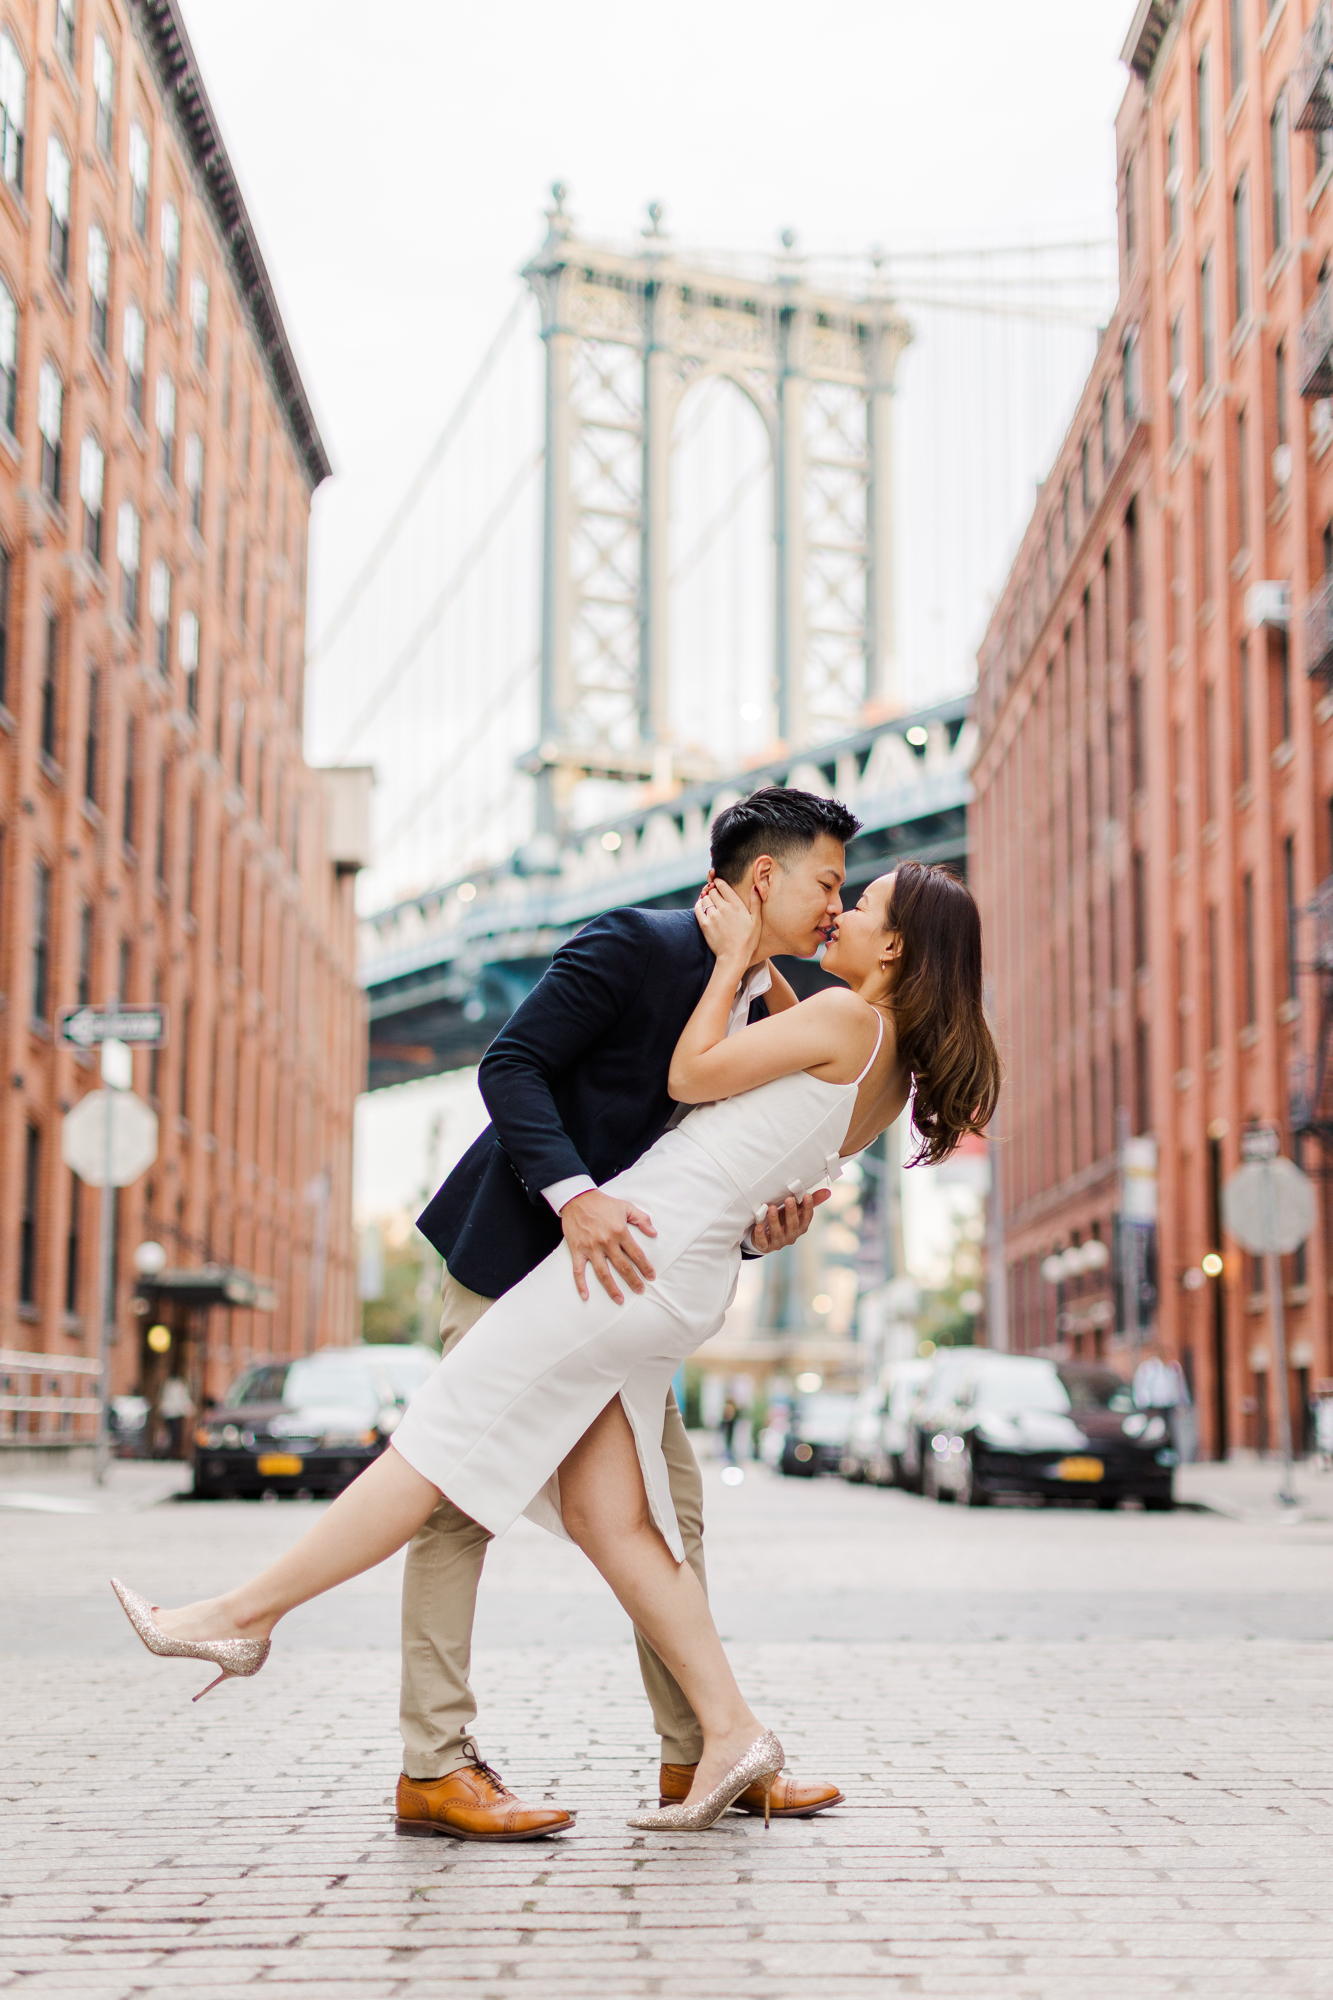 The Best Time of Year for Terrific DUMBO Engagement Photos